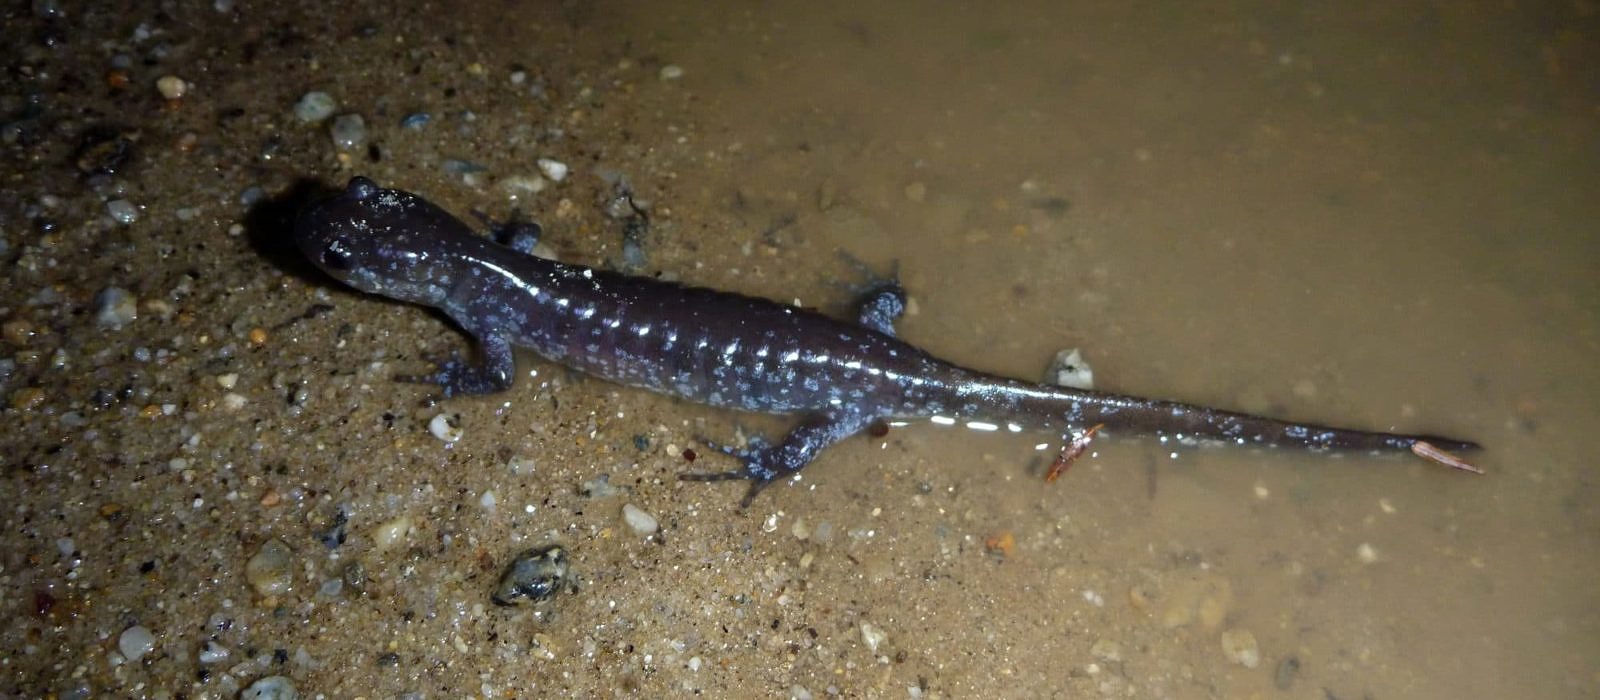 A Jefferson salamander makes its way across an unpaved road shoulder. This year, these salamanders will have a little extra help. (photo © Nathan Schaefer)